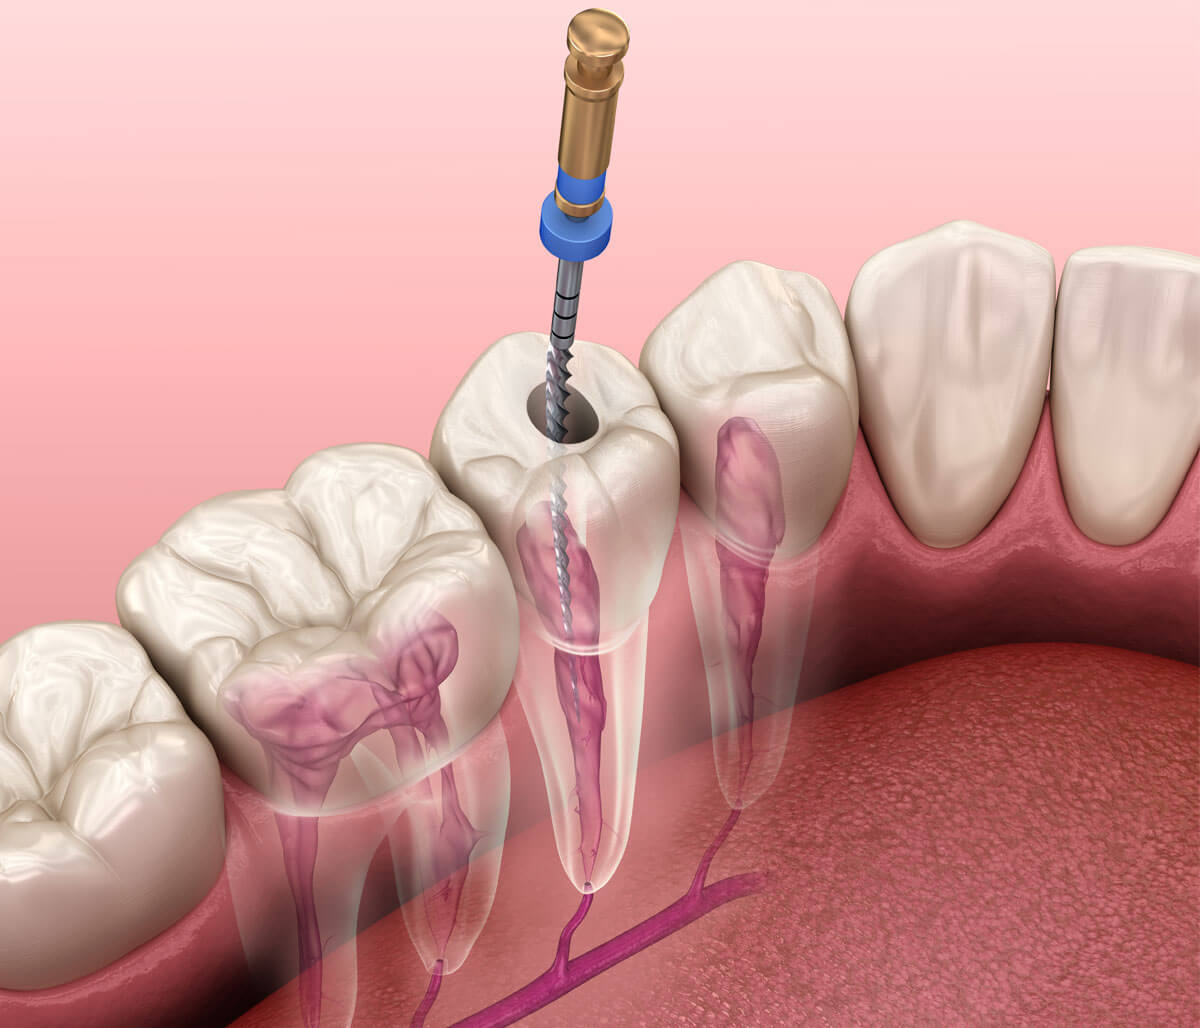 Restore your smile after root canal therapy with crown treatment in our Bloomington, IL office